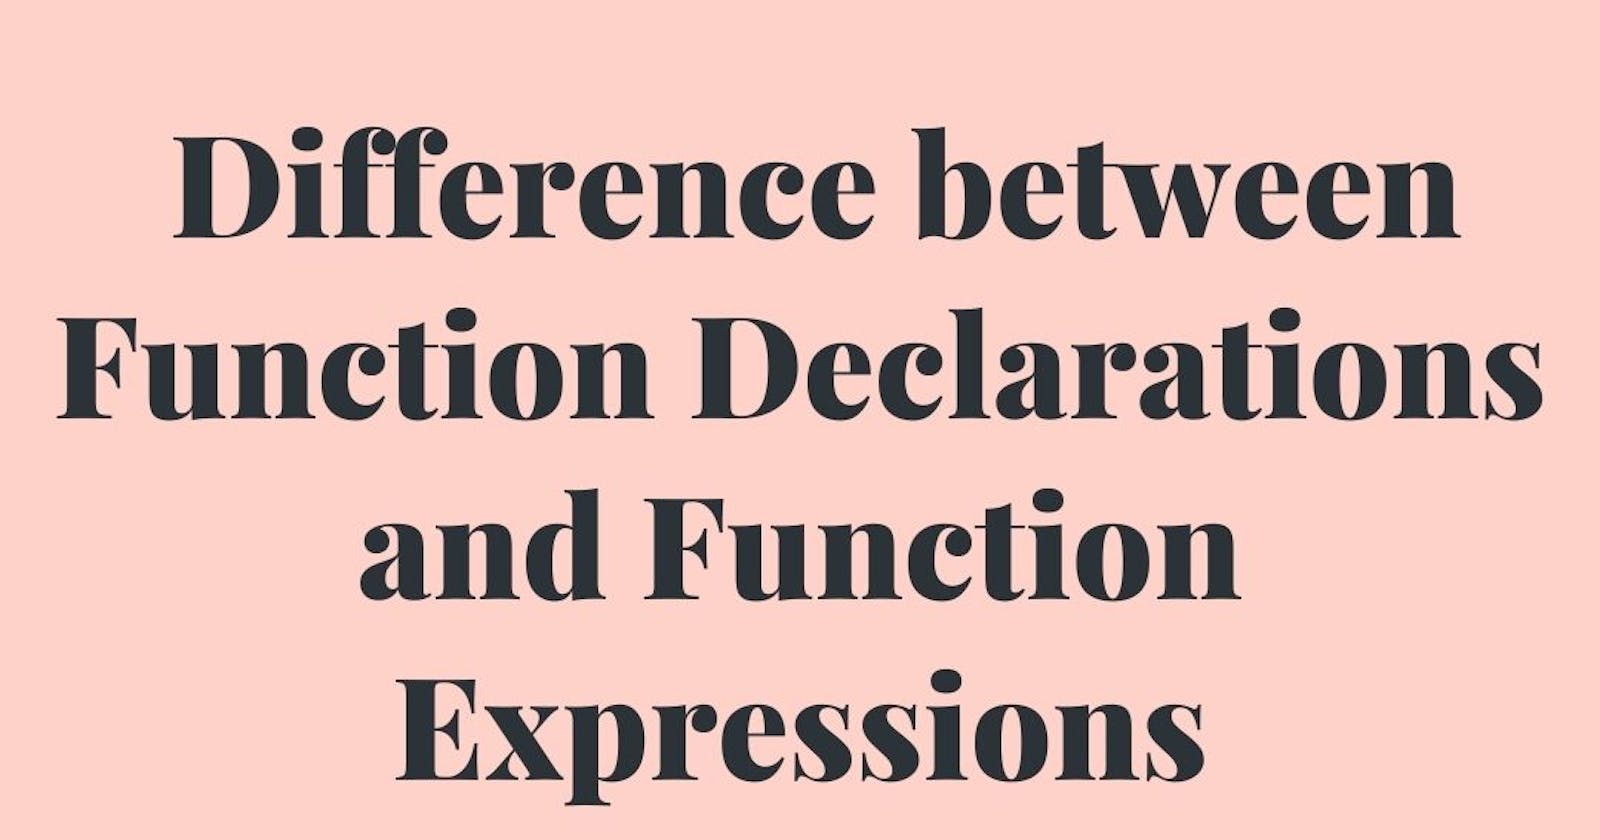 Difference between Function Declarations and Function Expressions